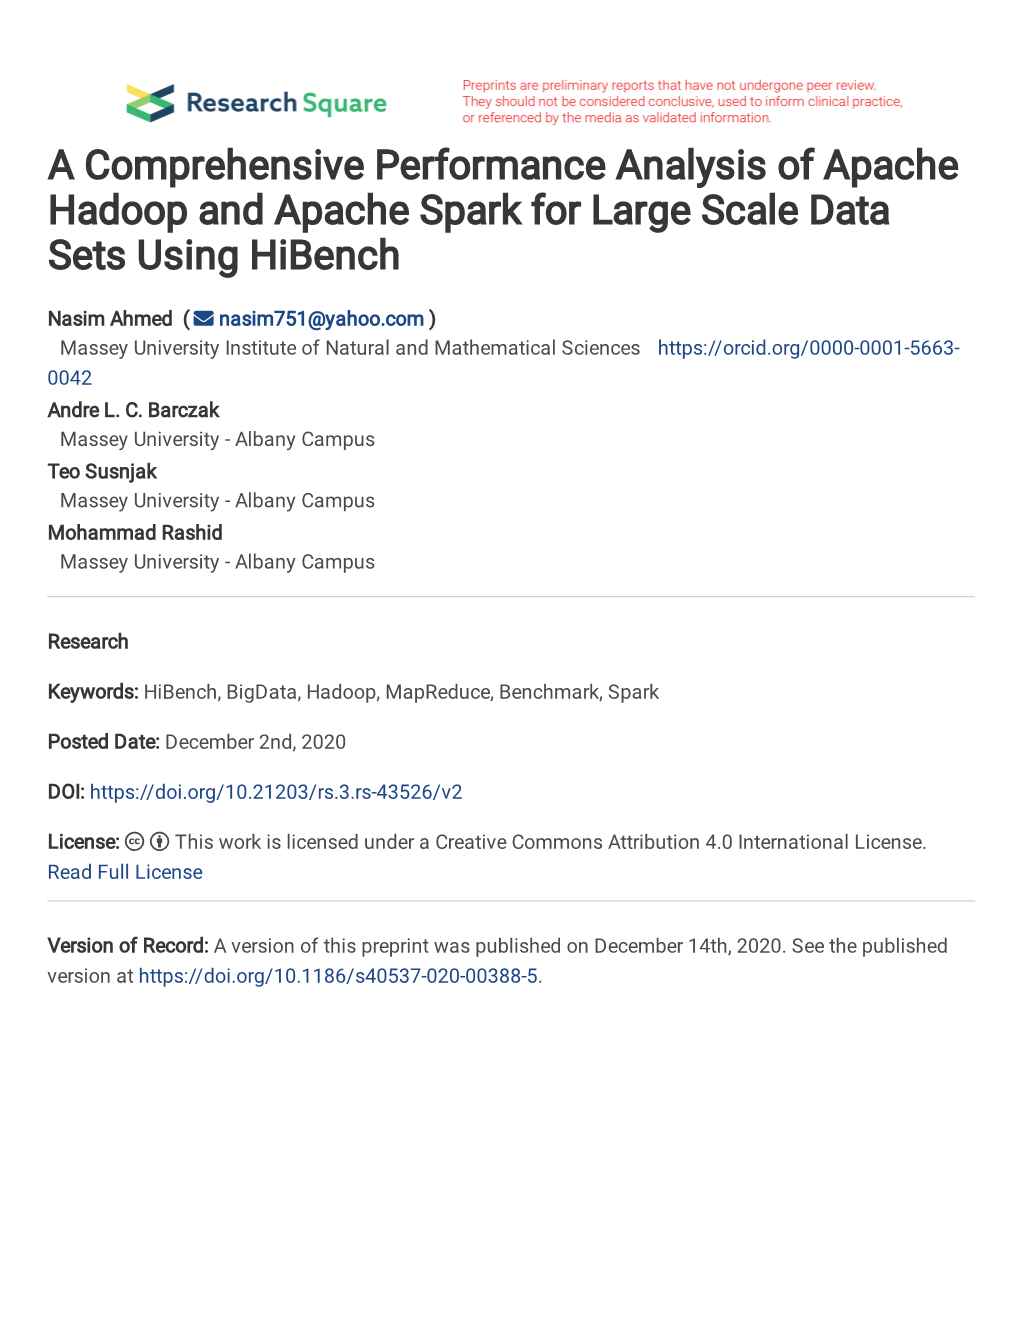 A Comprehensive Performance Analysis of Apache Hadoop and Apache Spark for Large Scale Data Sets Using Hibench